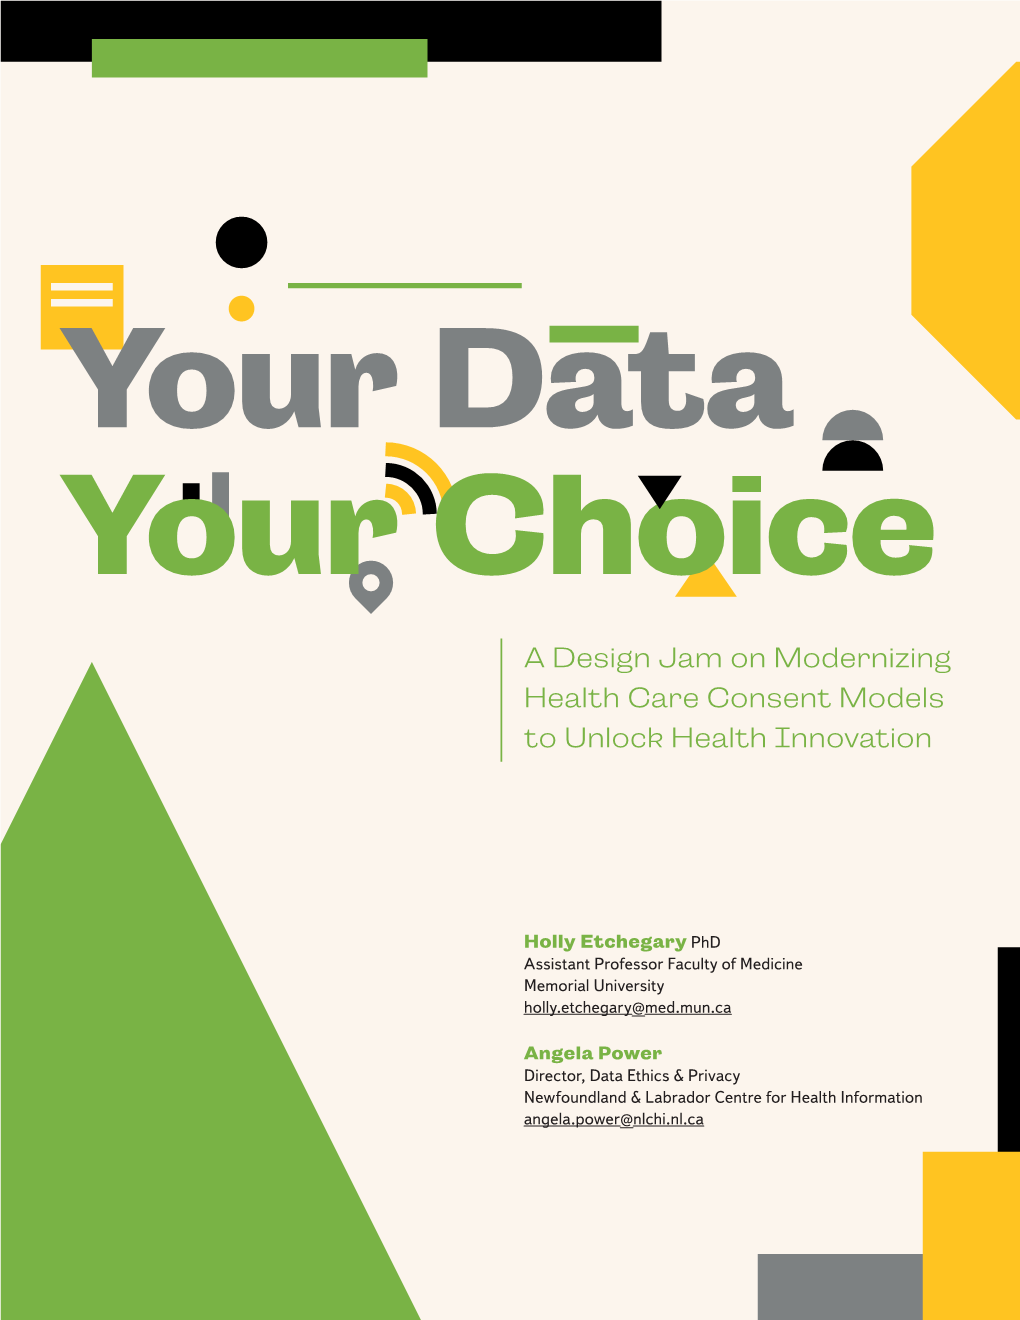 Your Data, Your Choice: a Design Jam on Modernizing Health Care Consent Models to Unlock Health